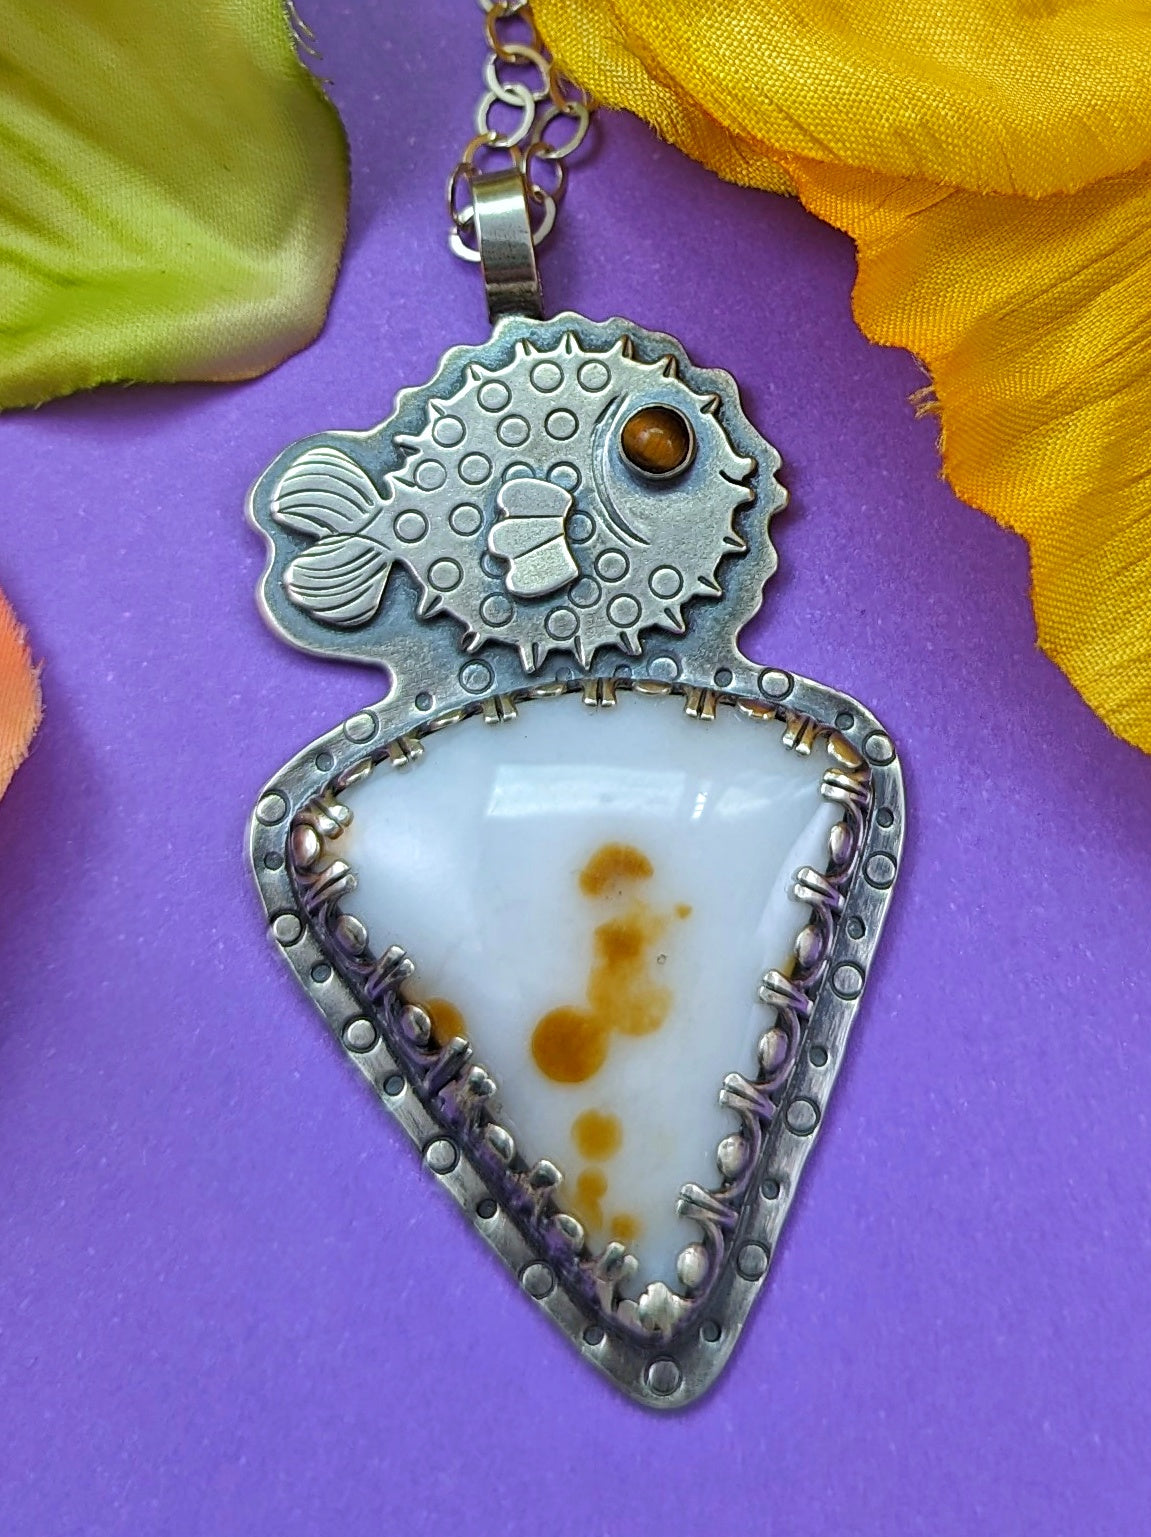 Blowfish necklace with polka dot agate